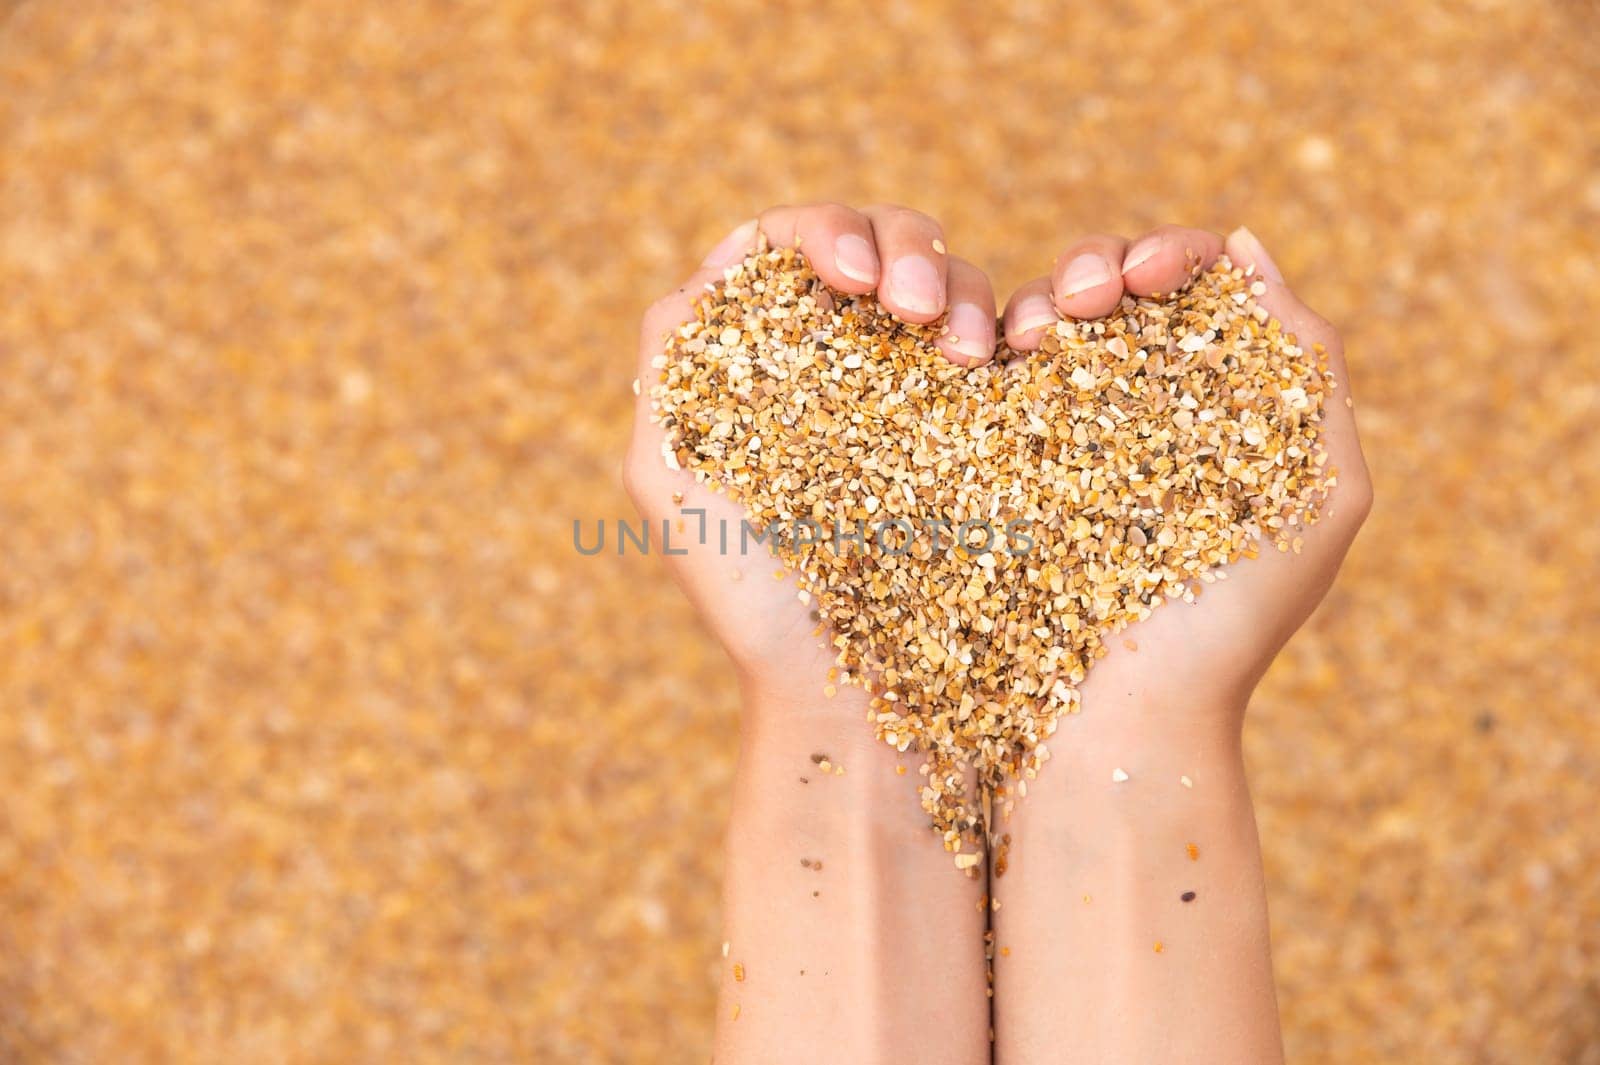 Hands hold sand in the shape of a heart. Close-up of woman's hands holding sand on the beach.